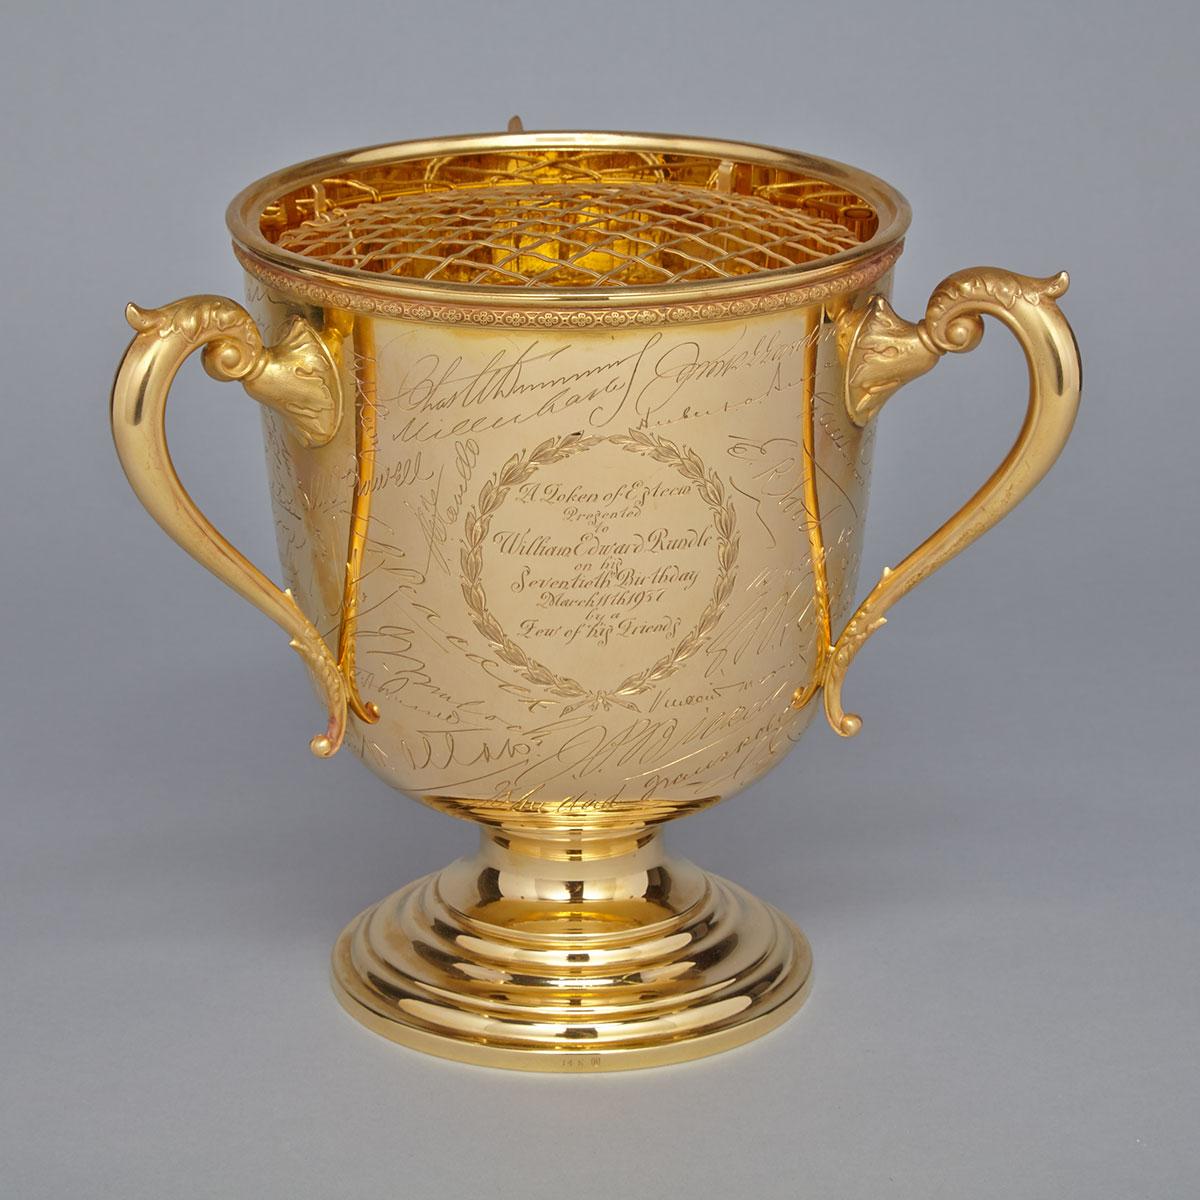 The Rundle Gold Cup  
Canadian Gold Three-Handled Cup, Roden Bros. Toronto, 1937